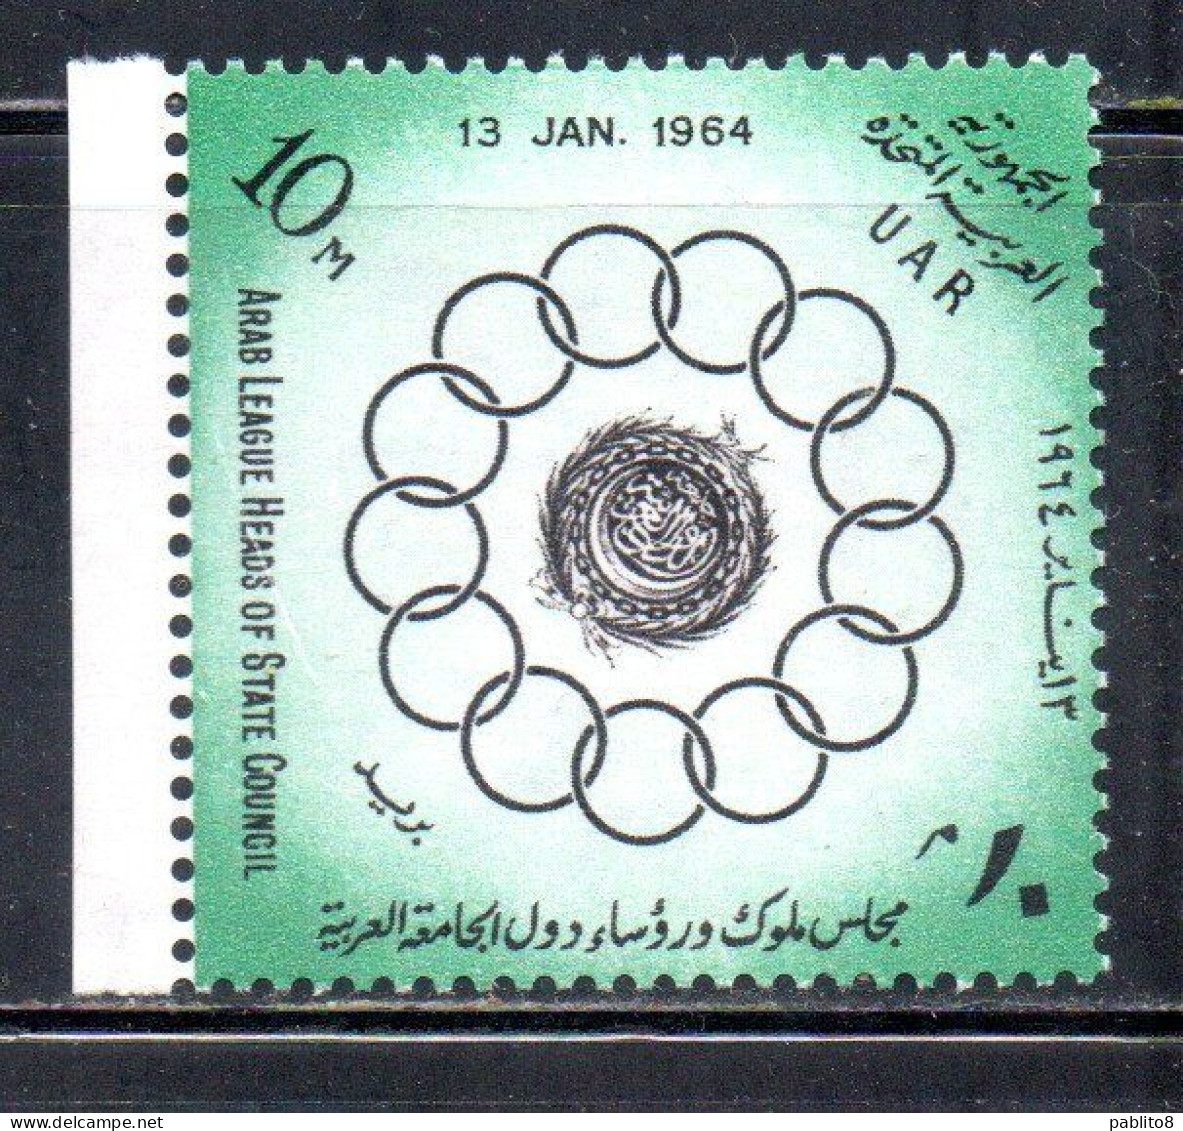 UAR EGYPT EGITTO 1964 FIRST MEETING OF THE HEADS STATE OF THE ARAB LEAGUE CAIRO 10m MNH - Nuevos